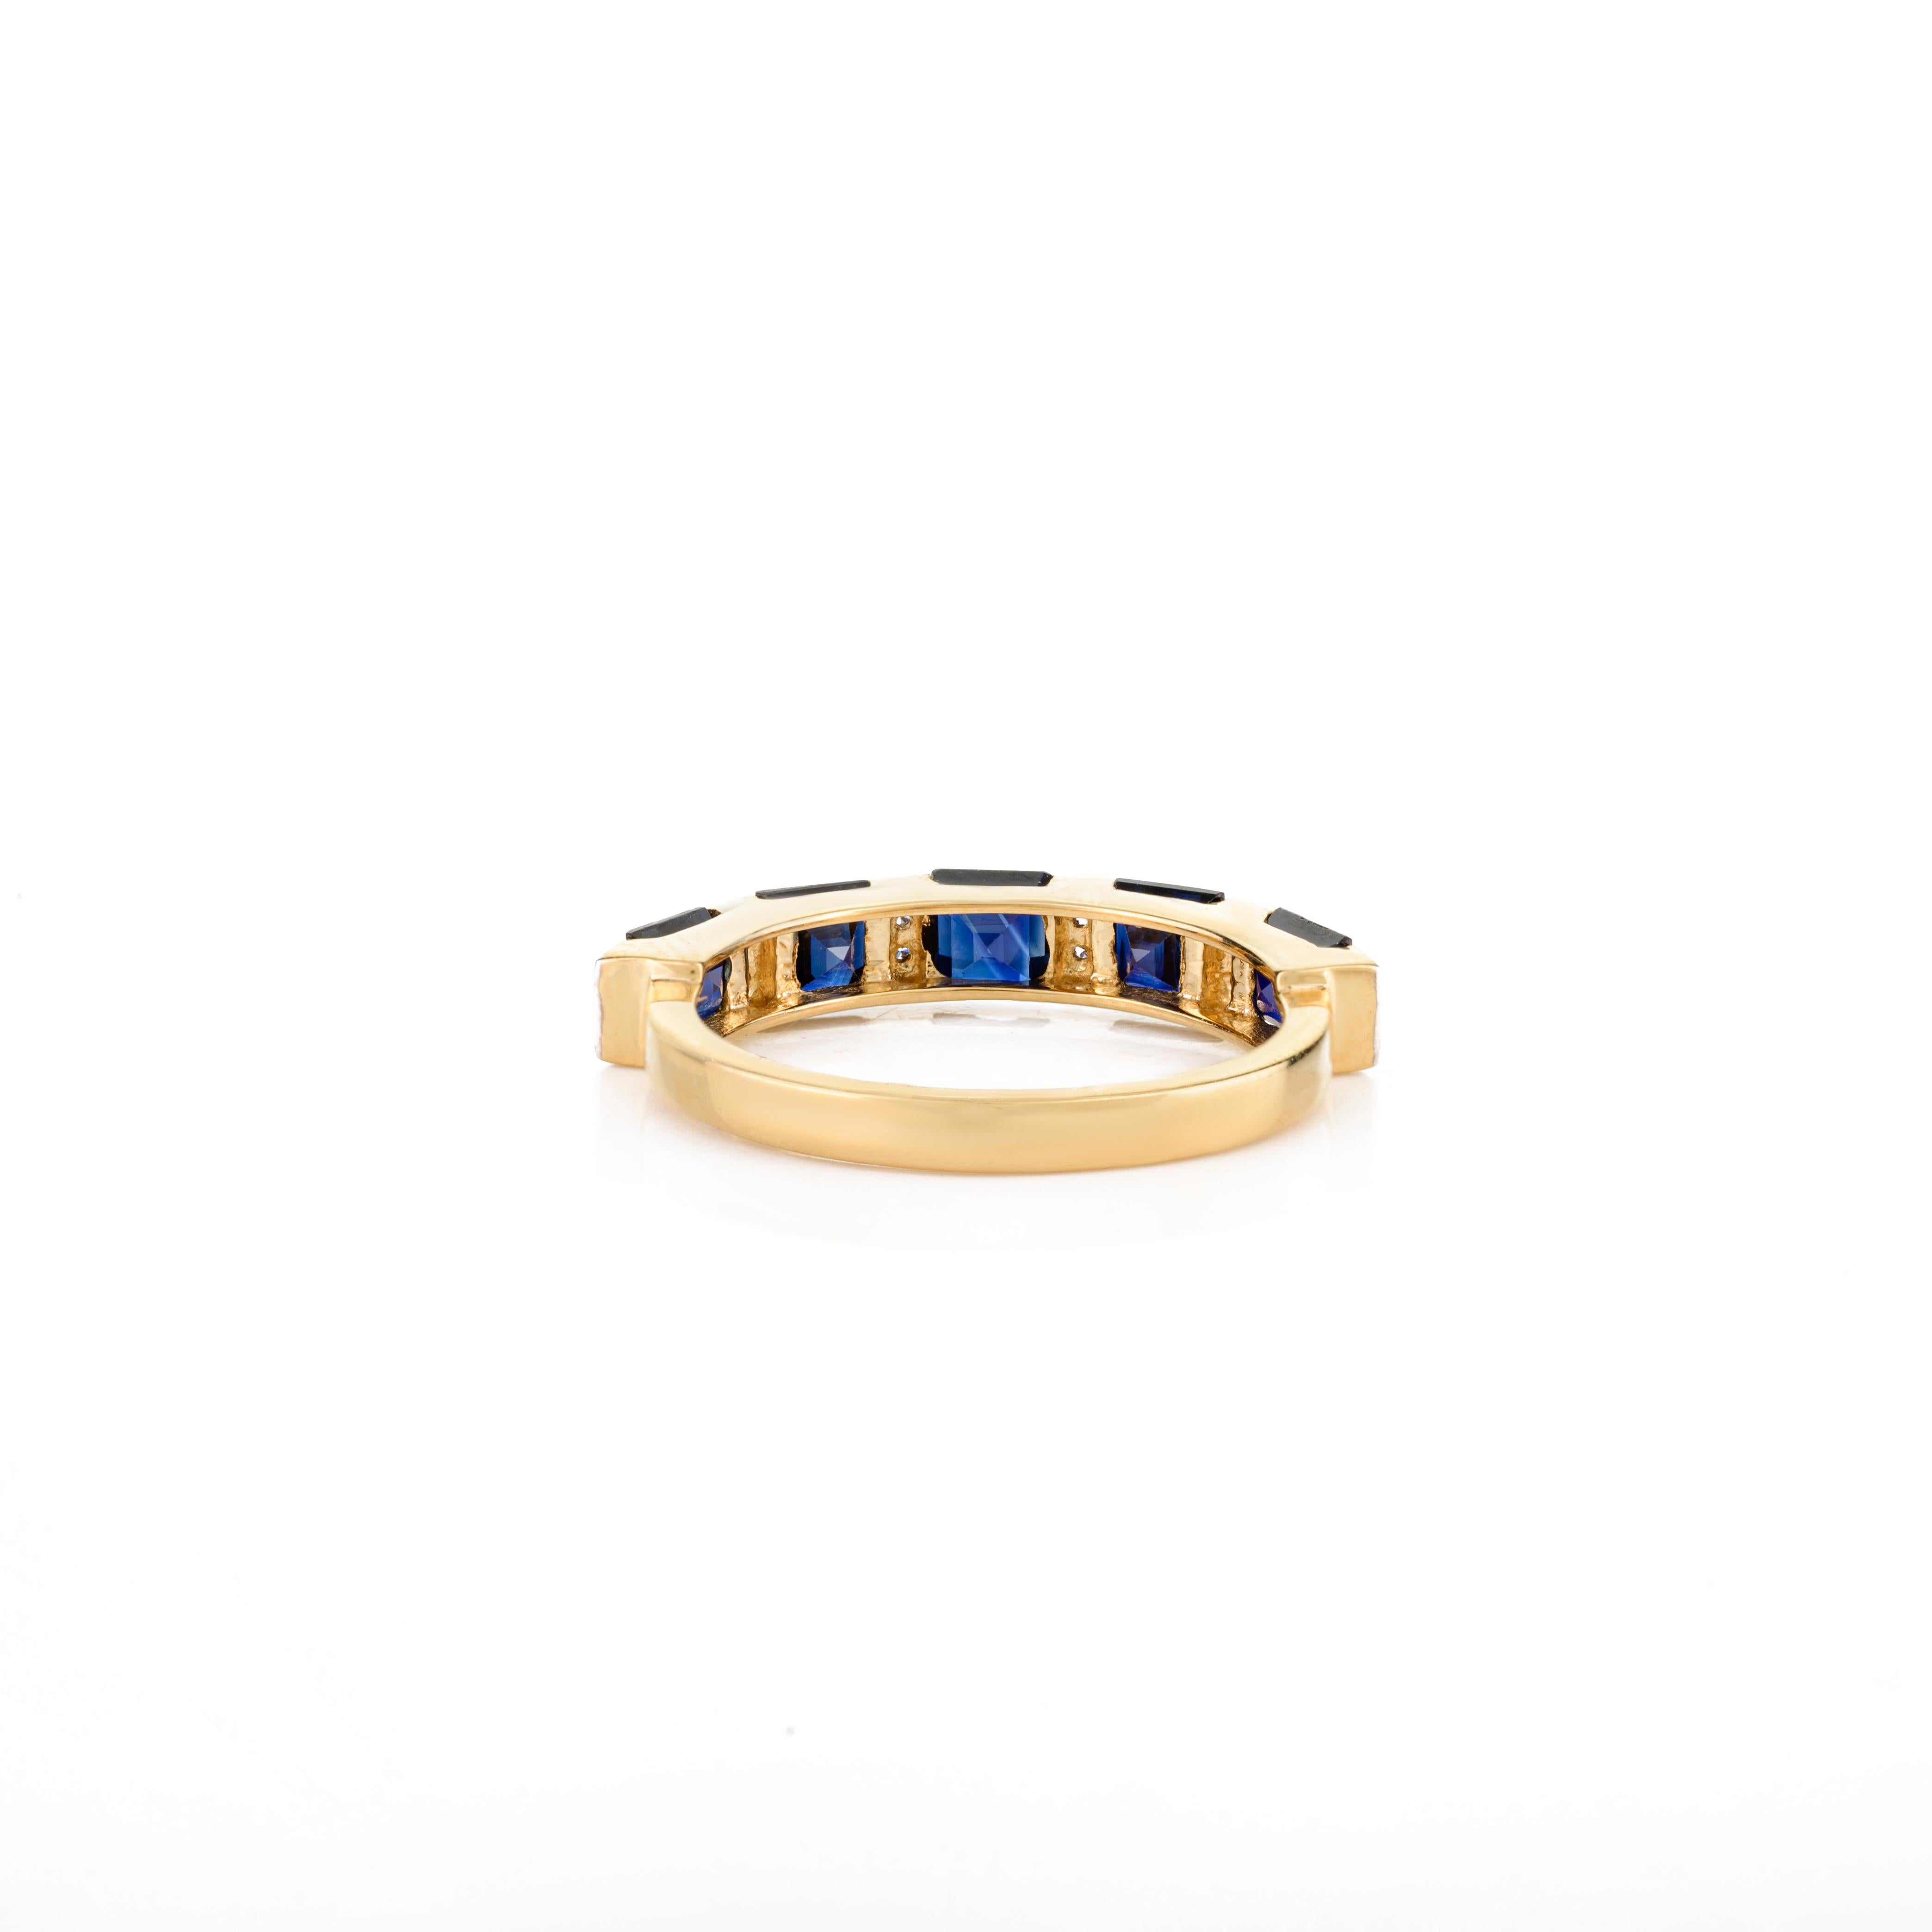 For Sale:  Fine Square Cut Blue Sapphire and Diamond Engagement Band Ring 18k Yellow Gold 3